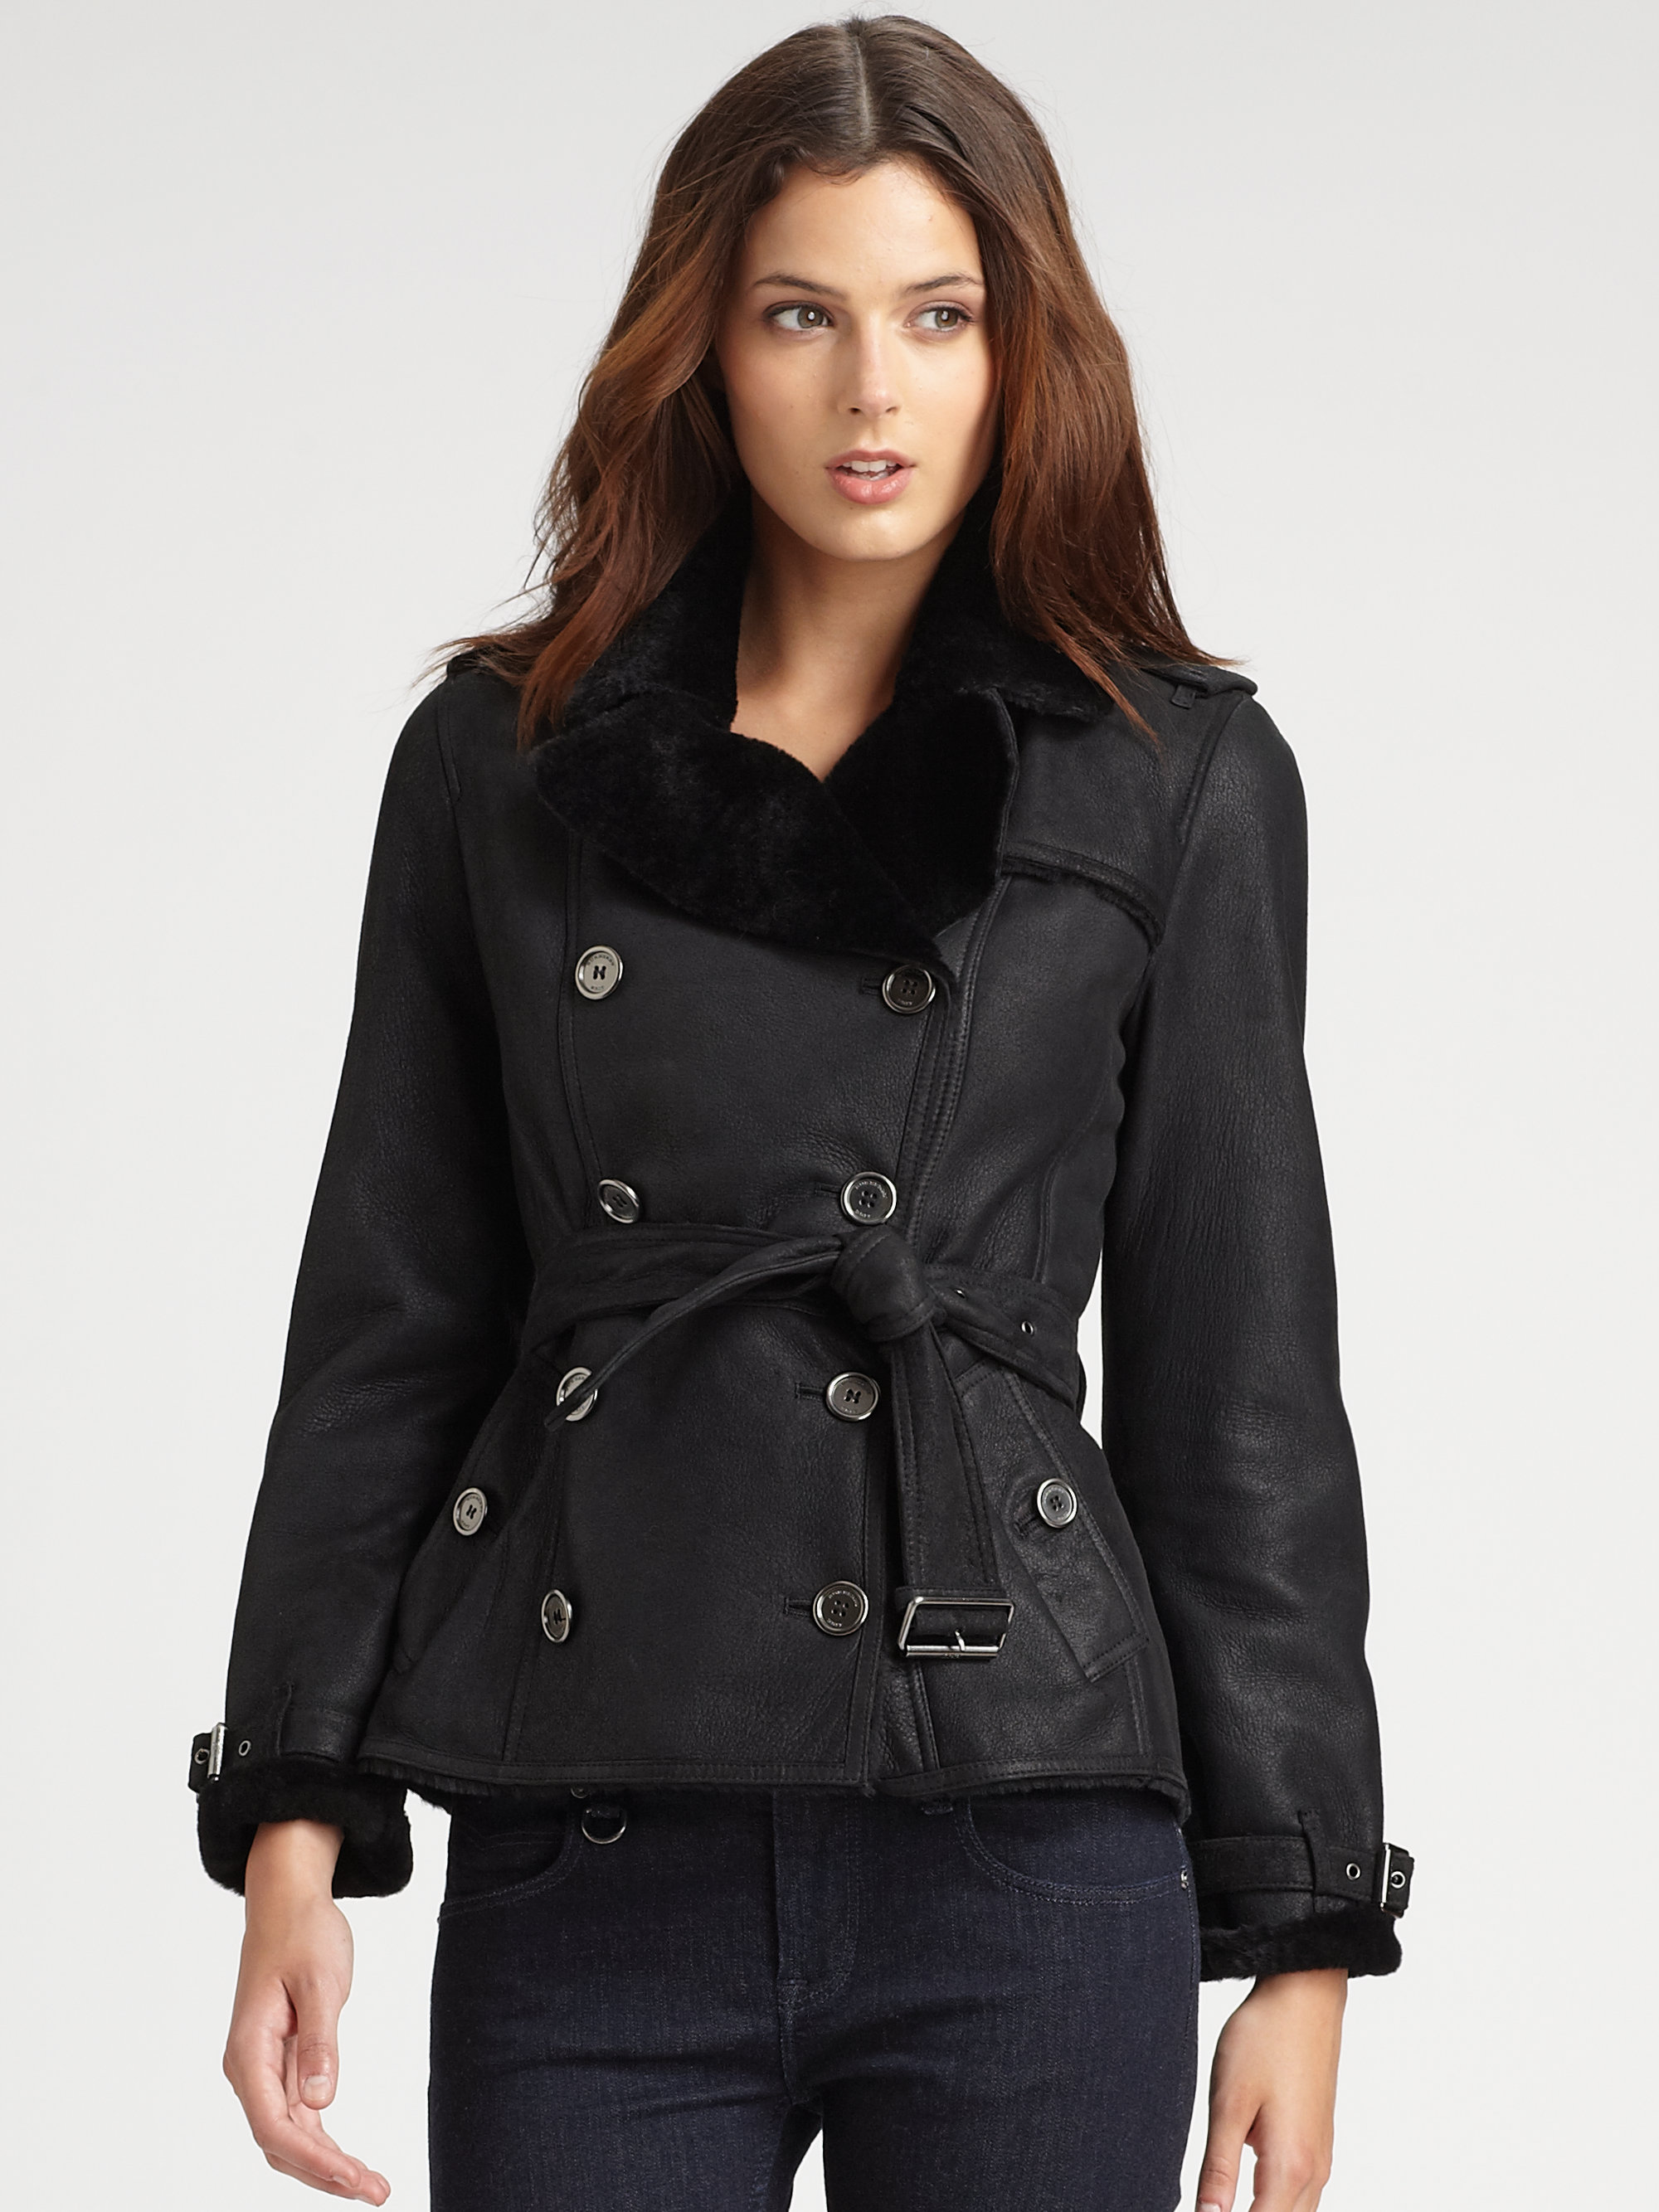 Burberry Brit Shearling Jacket in Black - Lyst